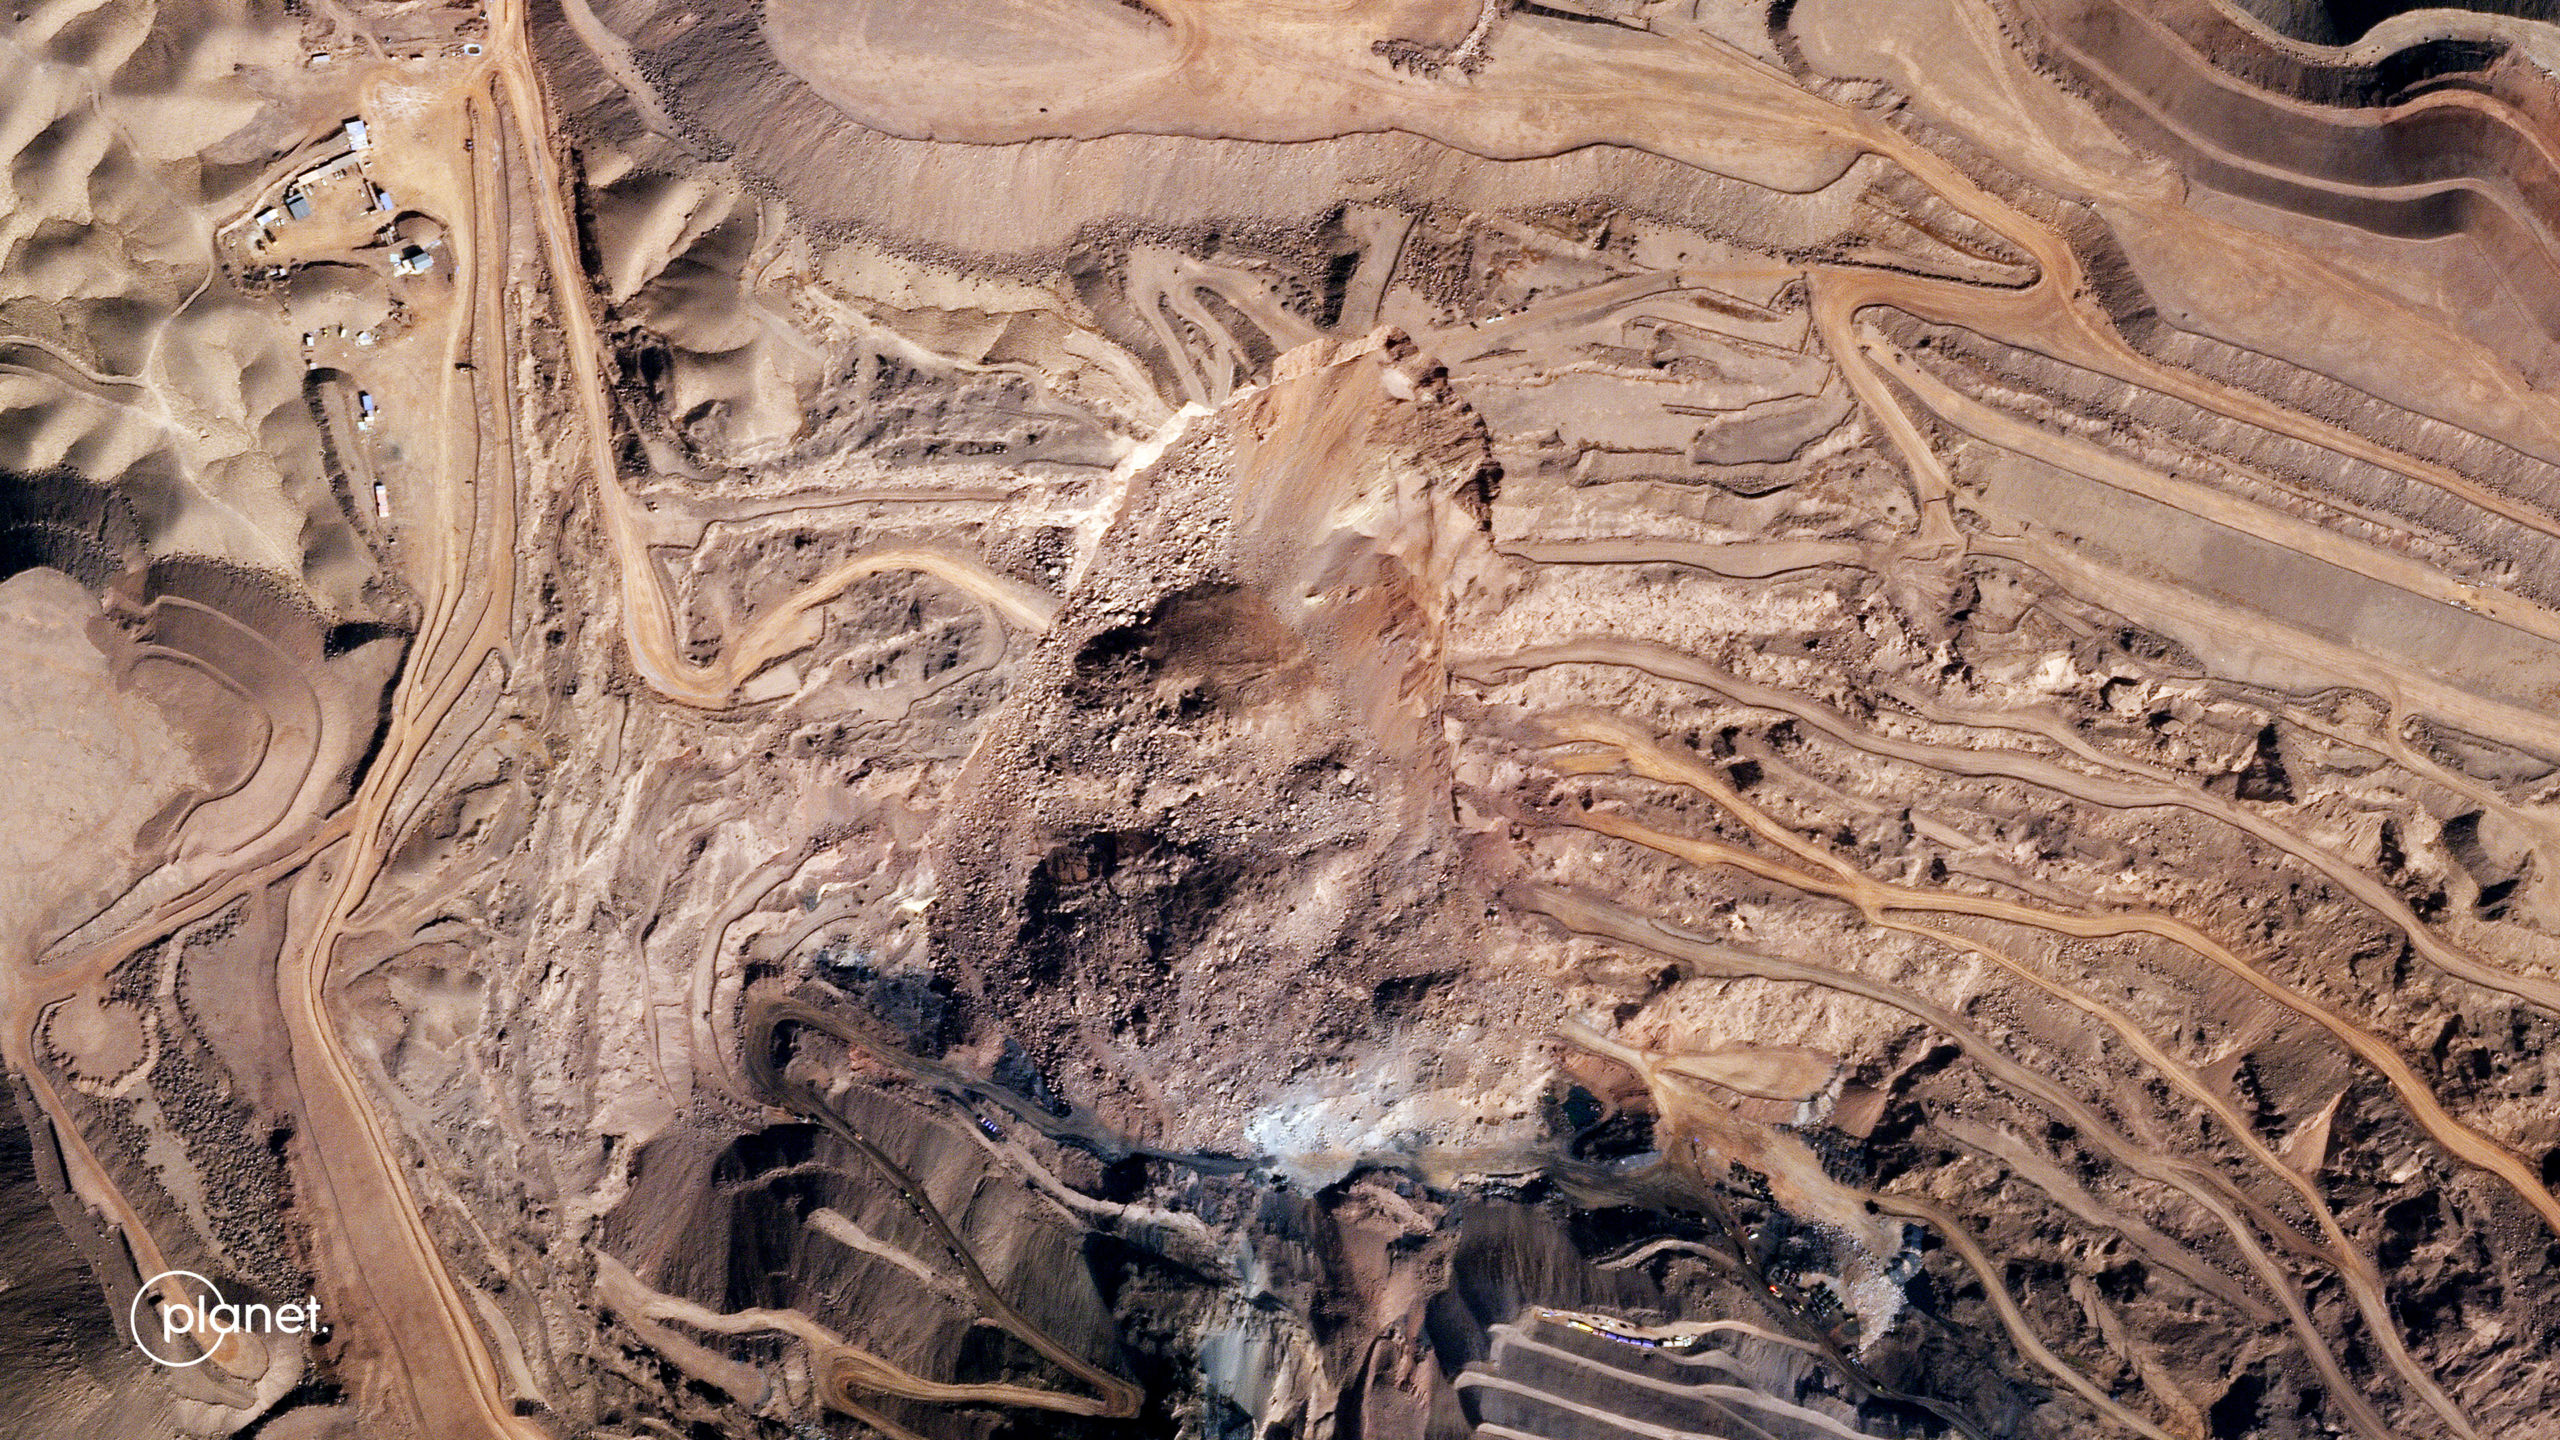 SkySat image of the detail of the 23 February 2023 coal mine landslide in Alxa League, China.